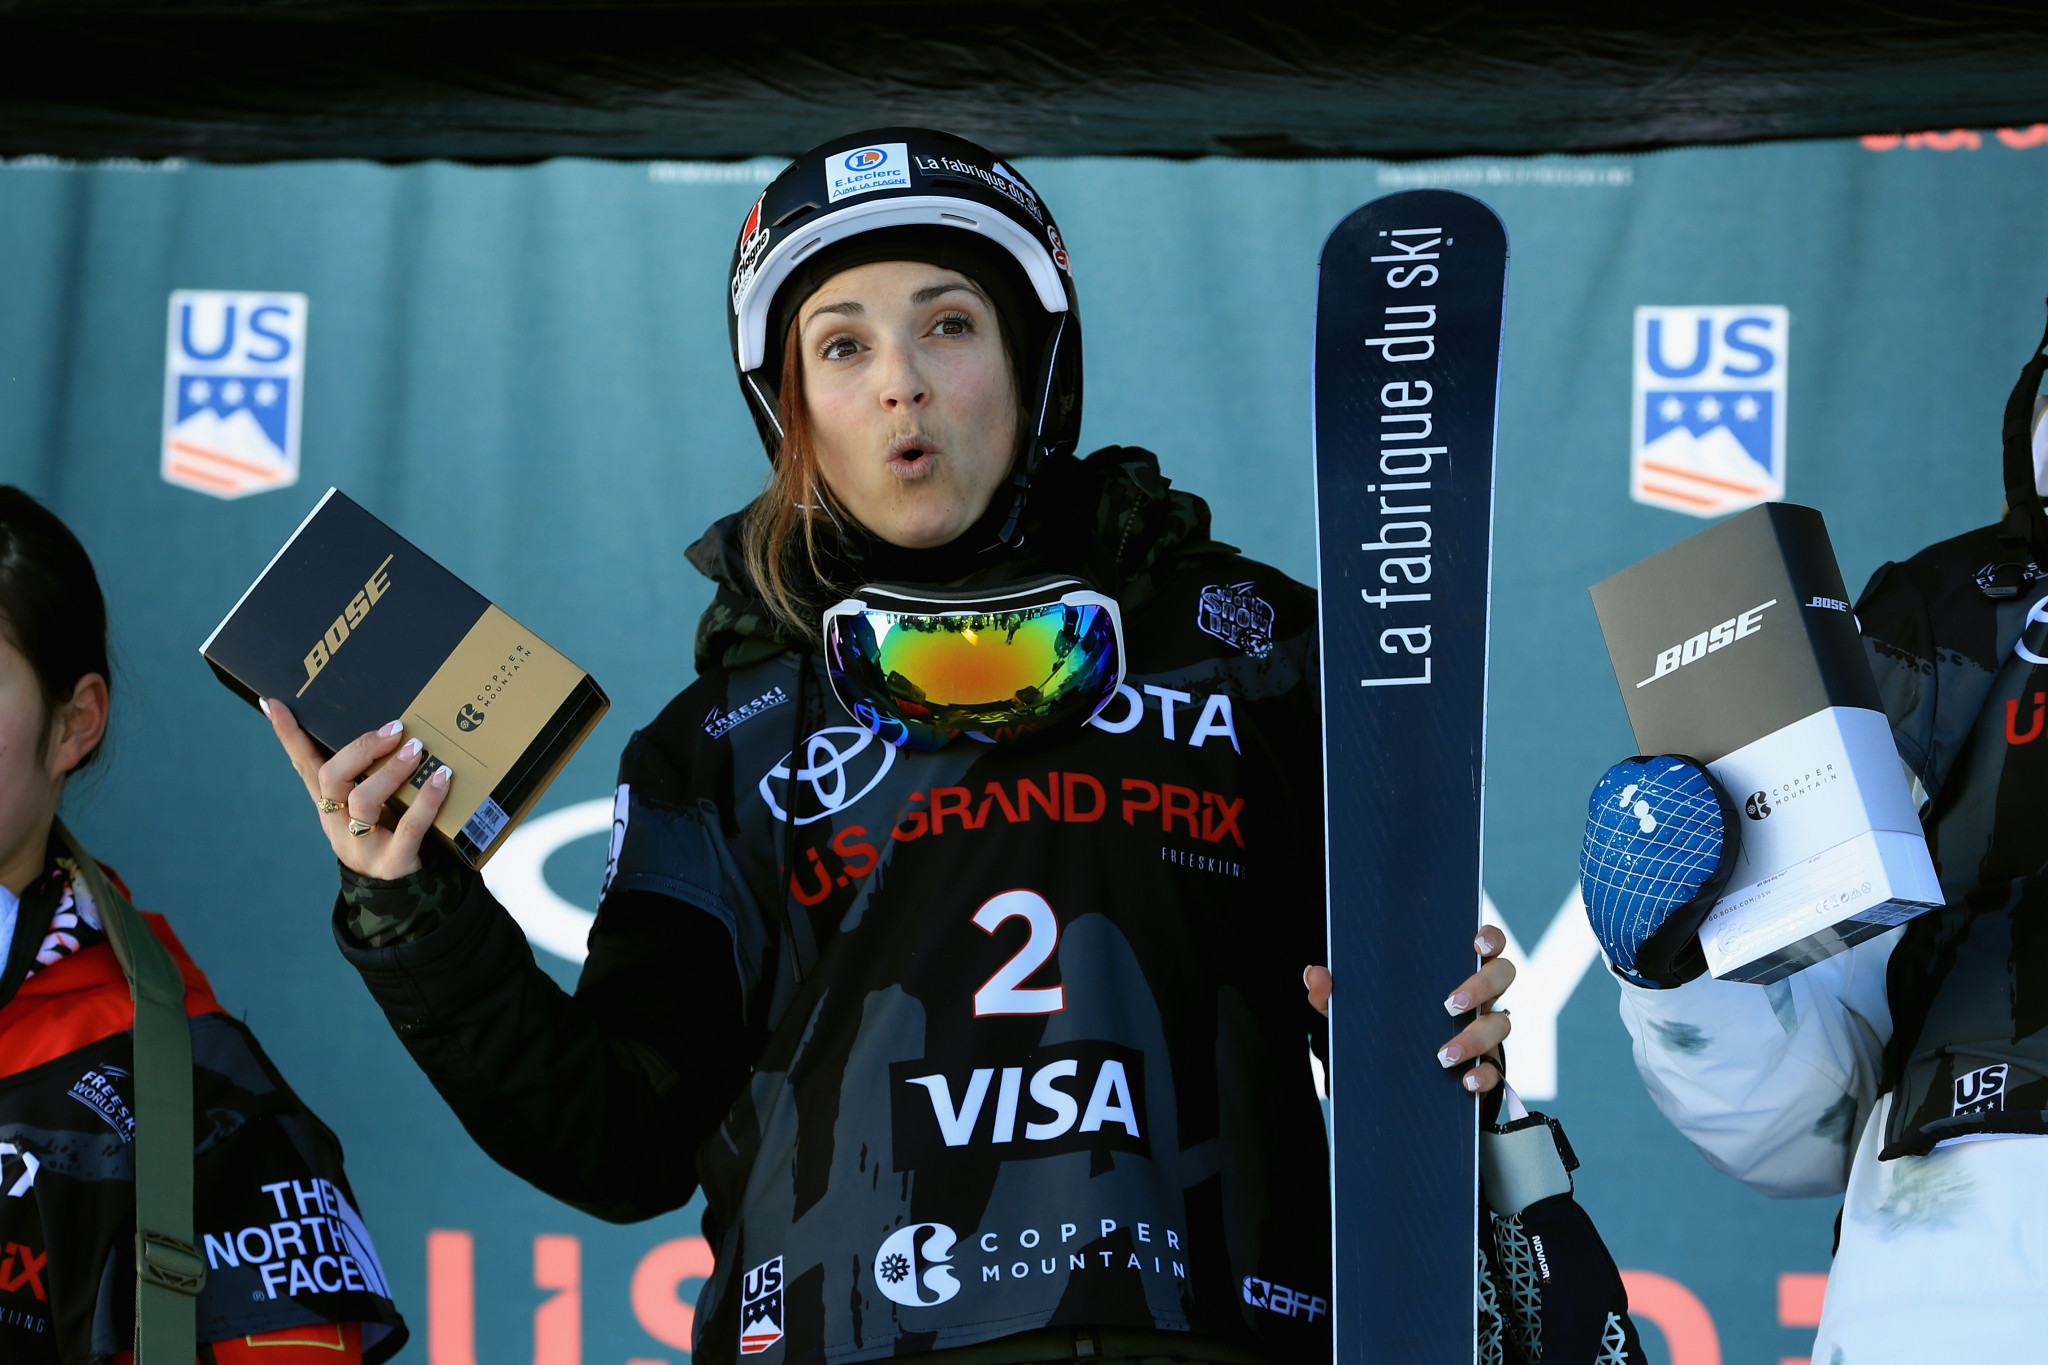 Marie Martinod of France, was victorious in the finals of the FIS Freeski World Cup 2018 Ladies' Halfpipe  in Copper Mountain, Colorado ©Getty Images